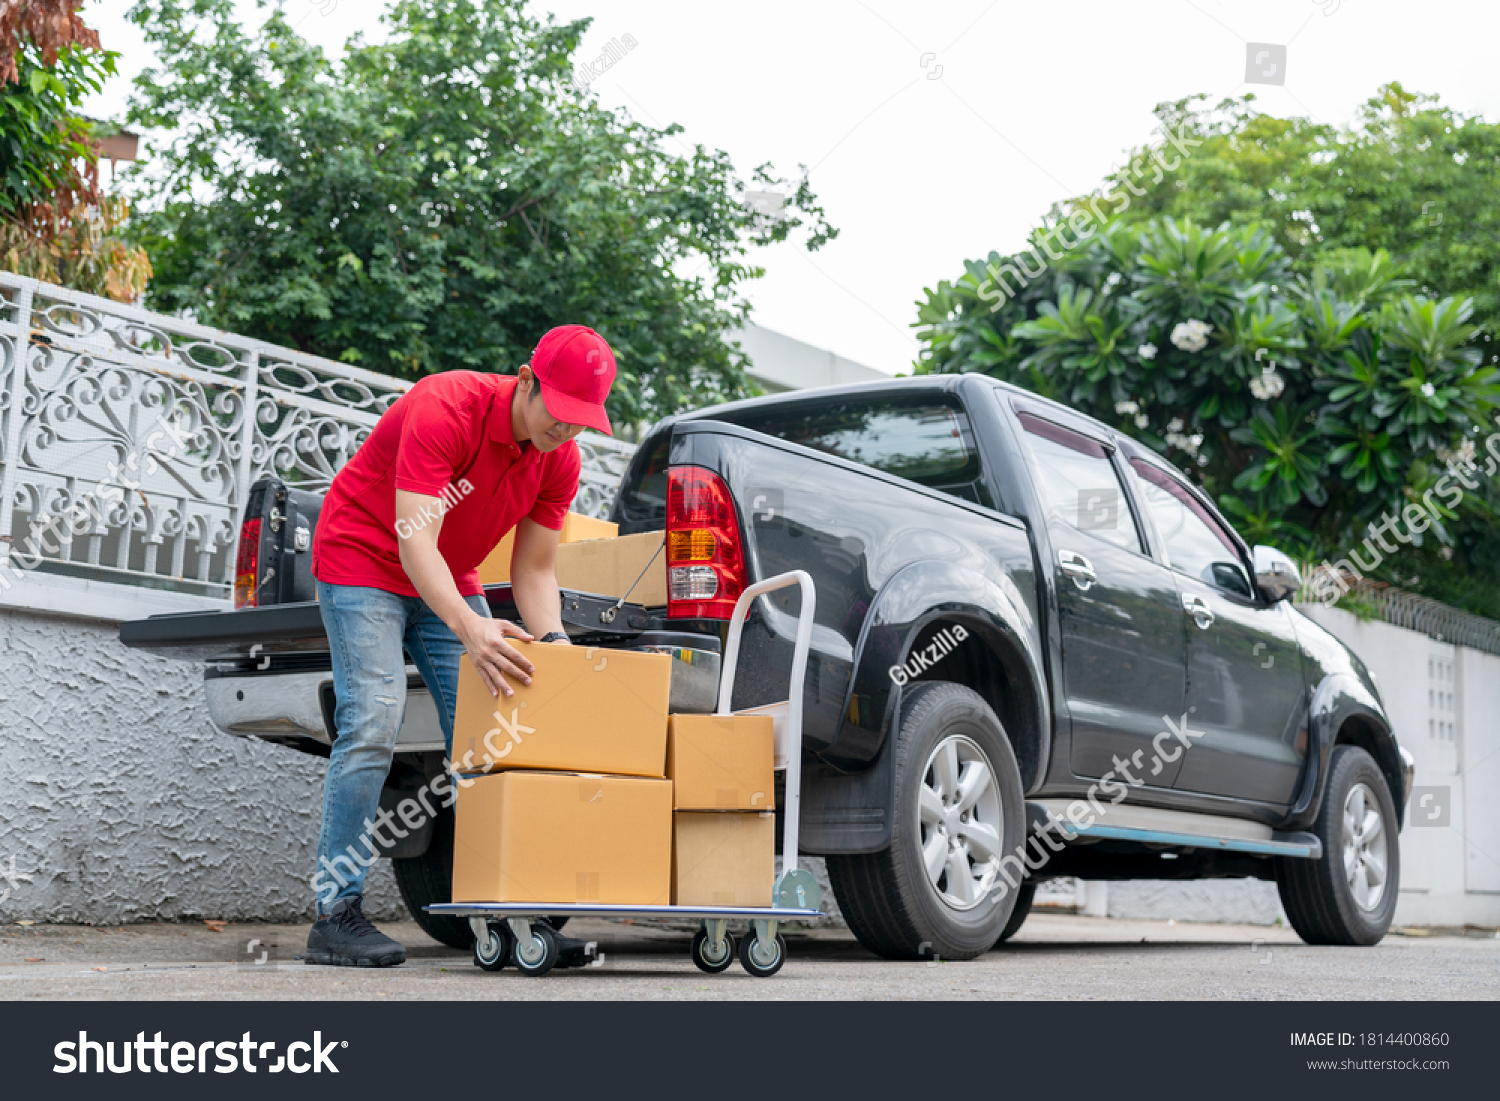 Delivery men in red uniform unloading cardboard boxes from pickup truck. Courier man sending the parcel or package to the customer on a business day. Online shopping and transport logistics concept. #1814400860